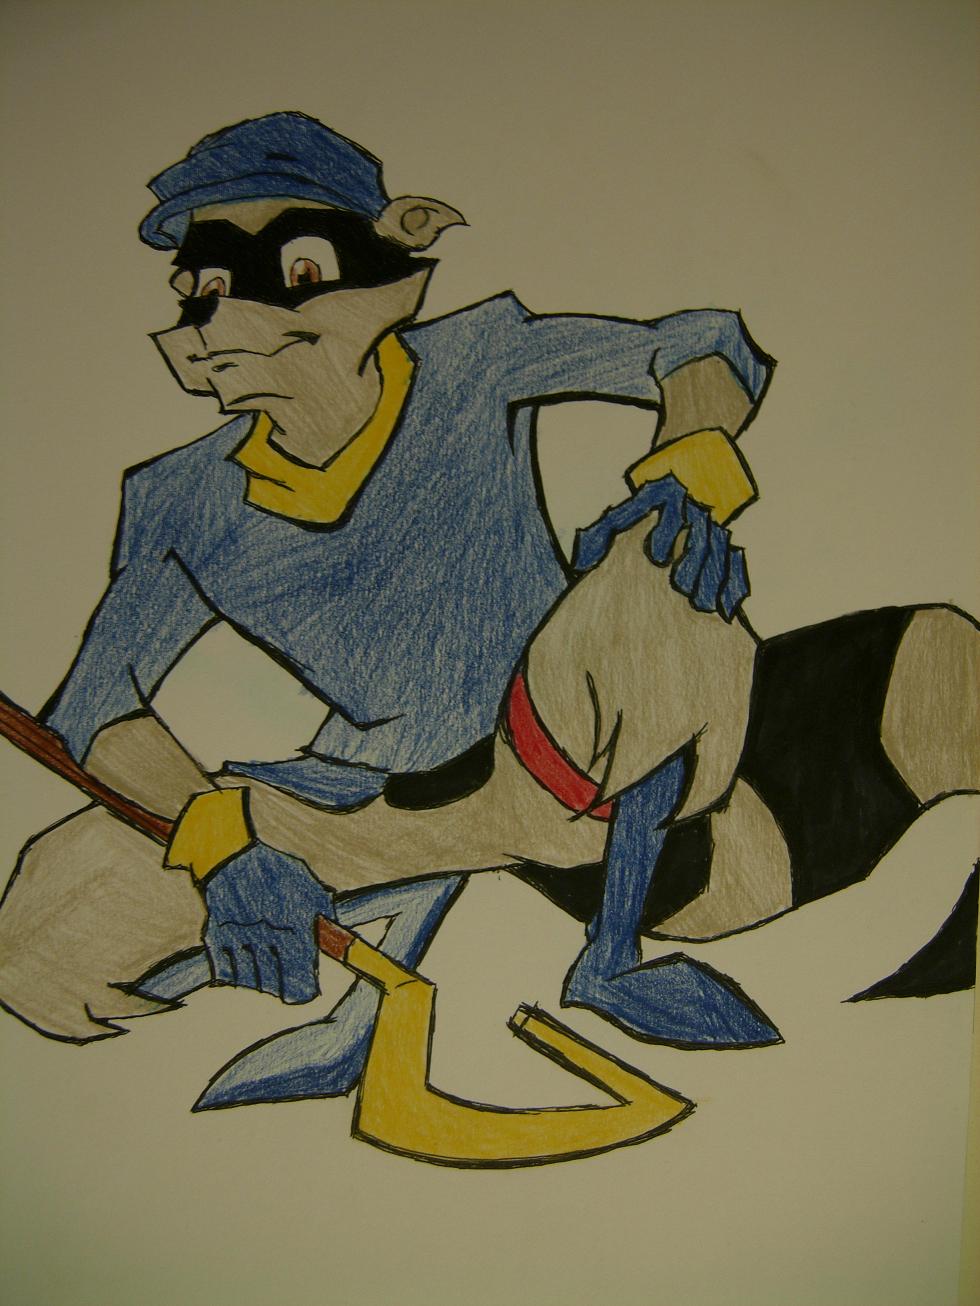 Sly Cooper crouching by hiddenstranger